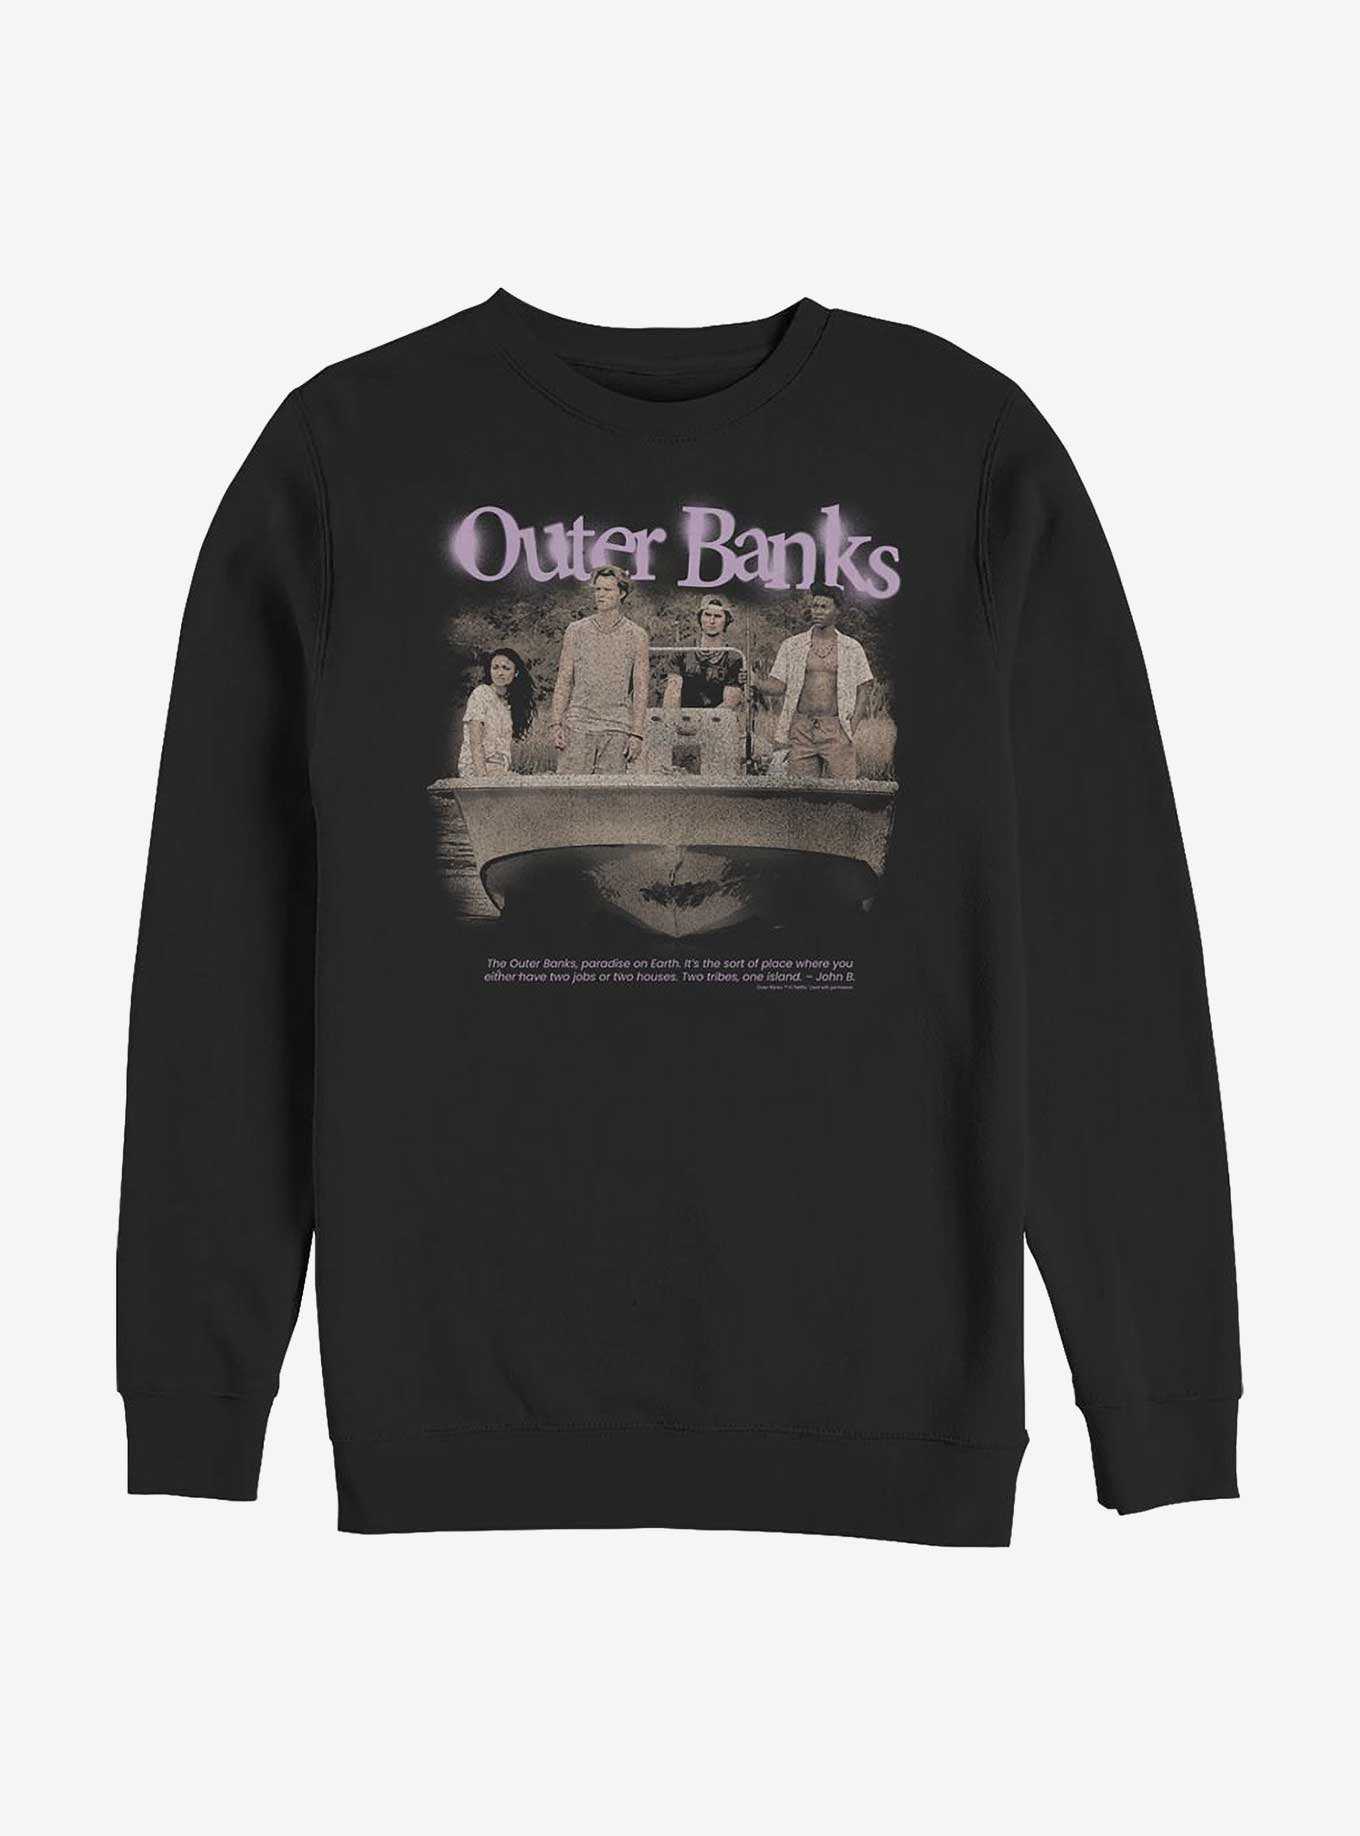 Outer Banks Spray Paint Sweatshirt, , hi-res